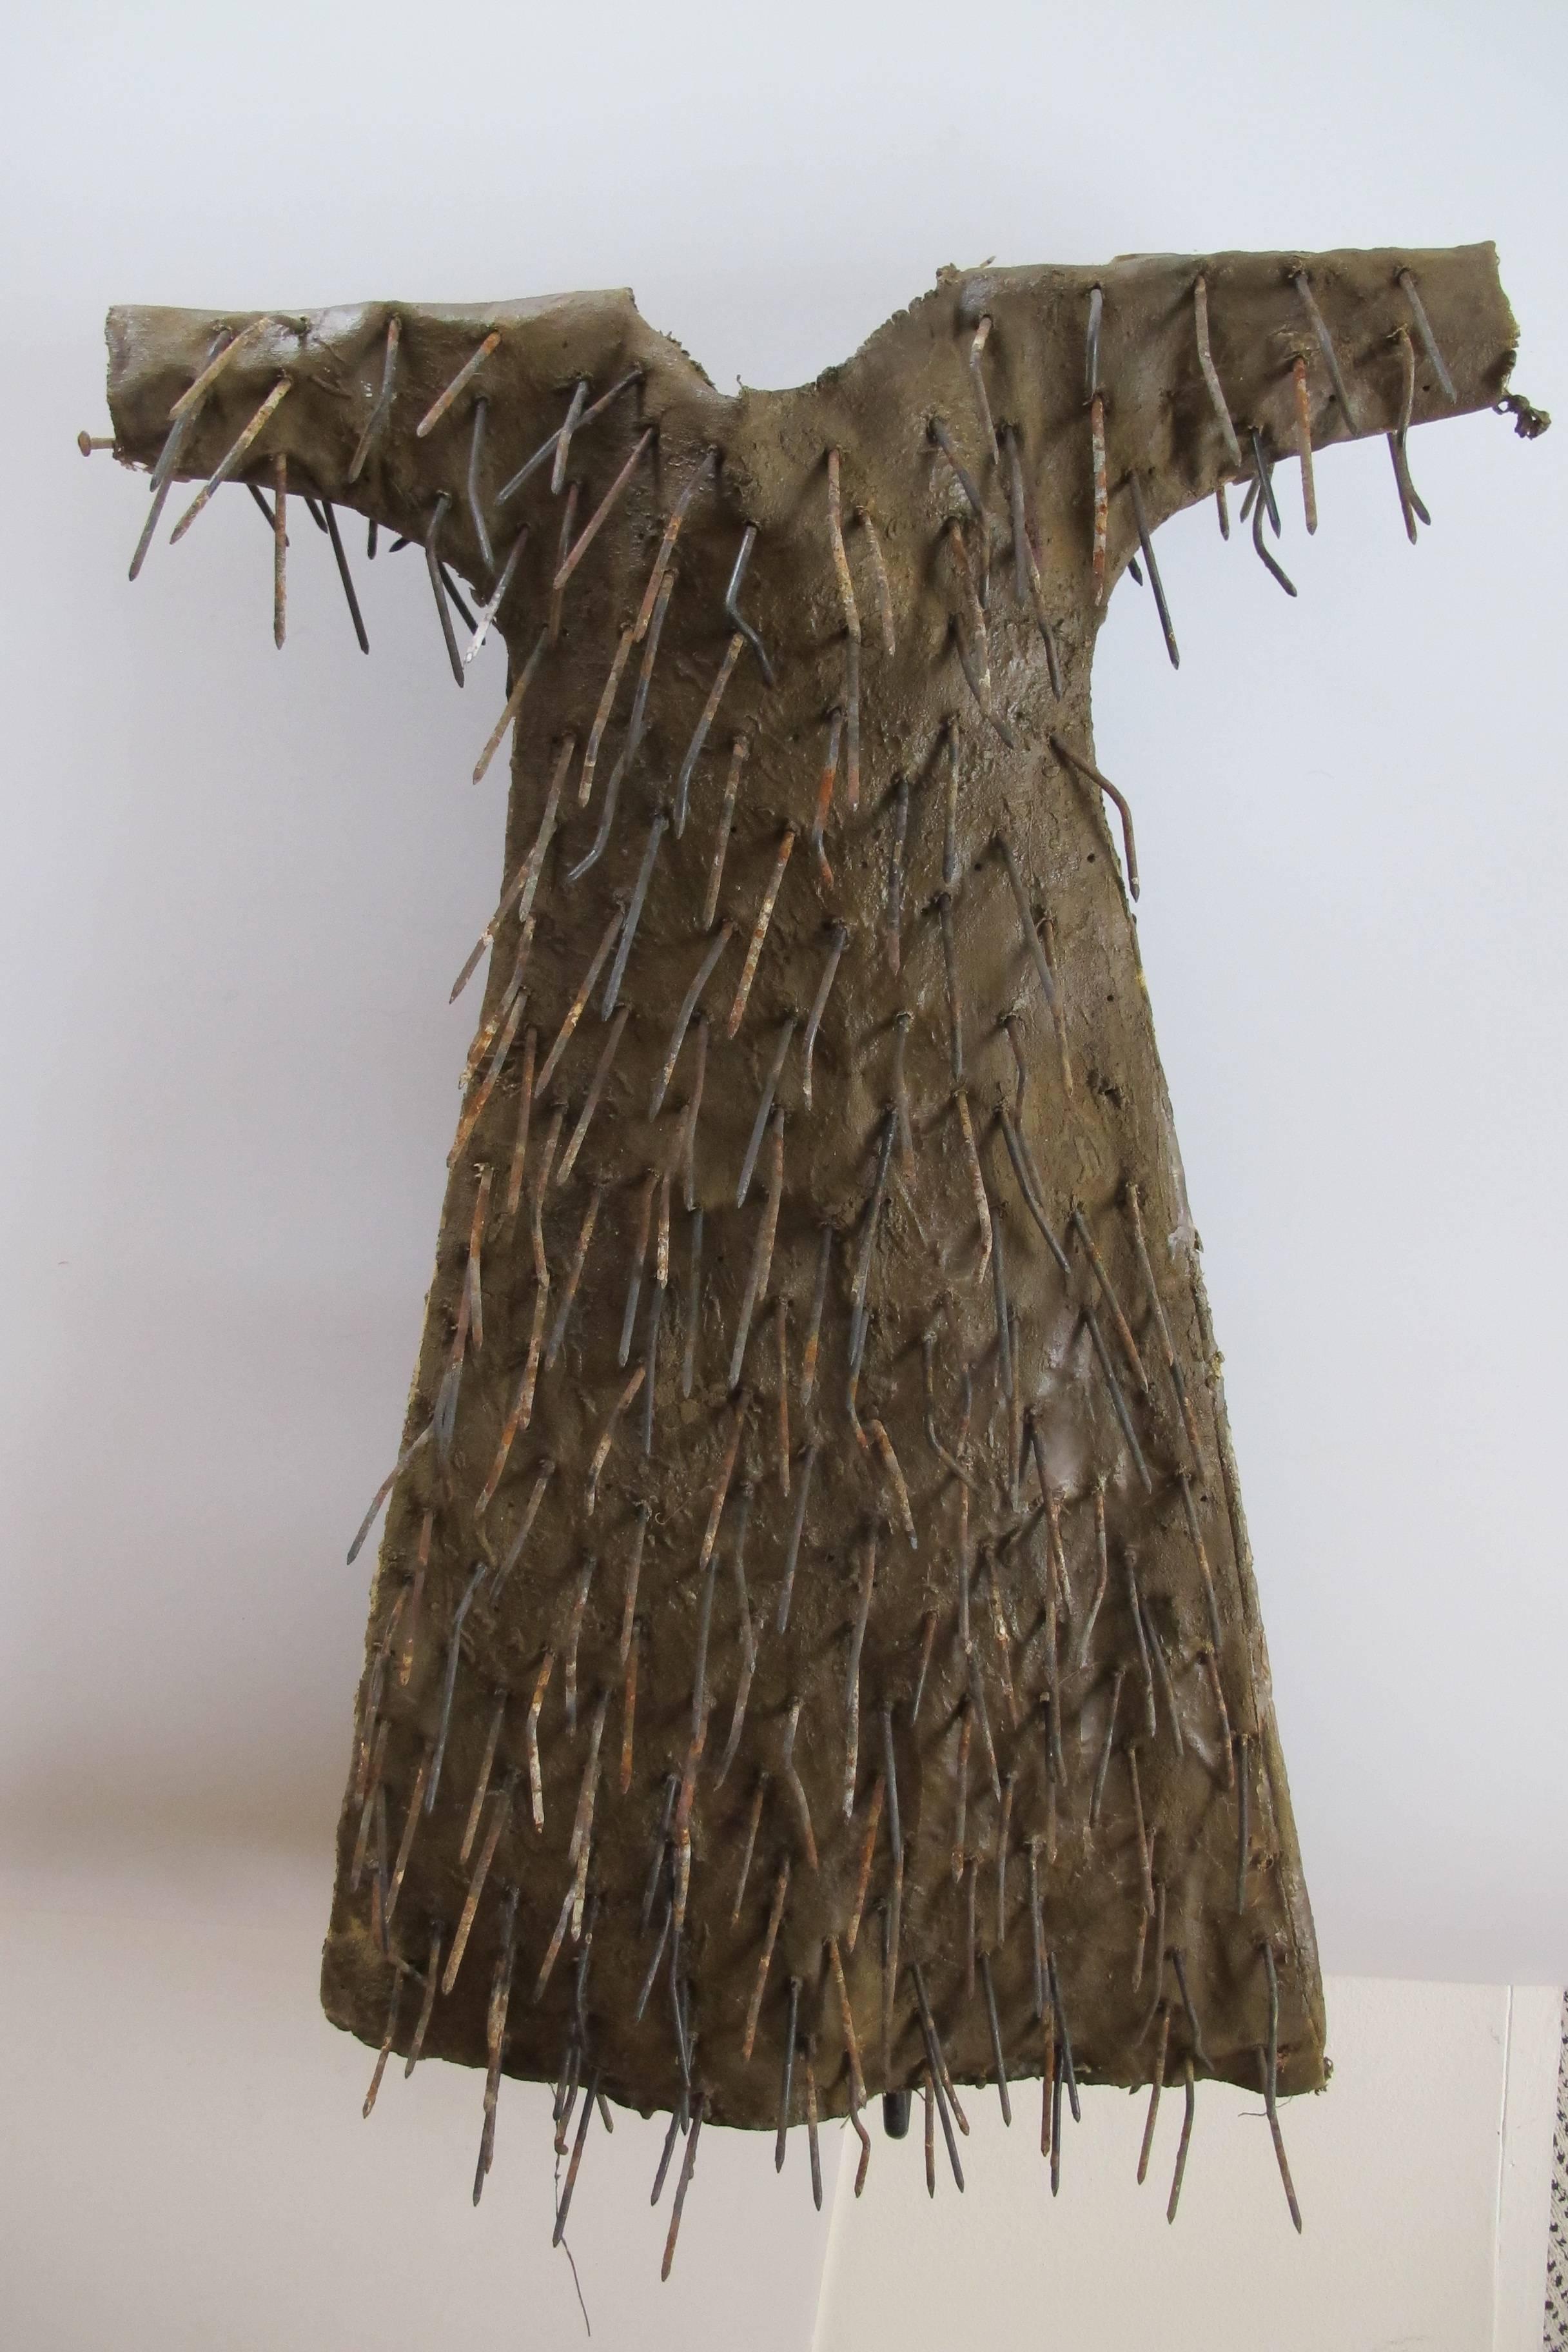 Dress as sculpture made by artist Larry Calkins. The child size dress was sewn by Larry Calkins and has old iron nails perforating the cloth. Like other dress pieces by Calkins this has a surface color for earth pigments and bees wax.
There is a